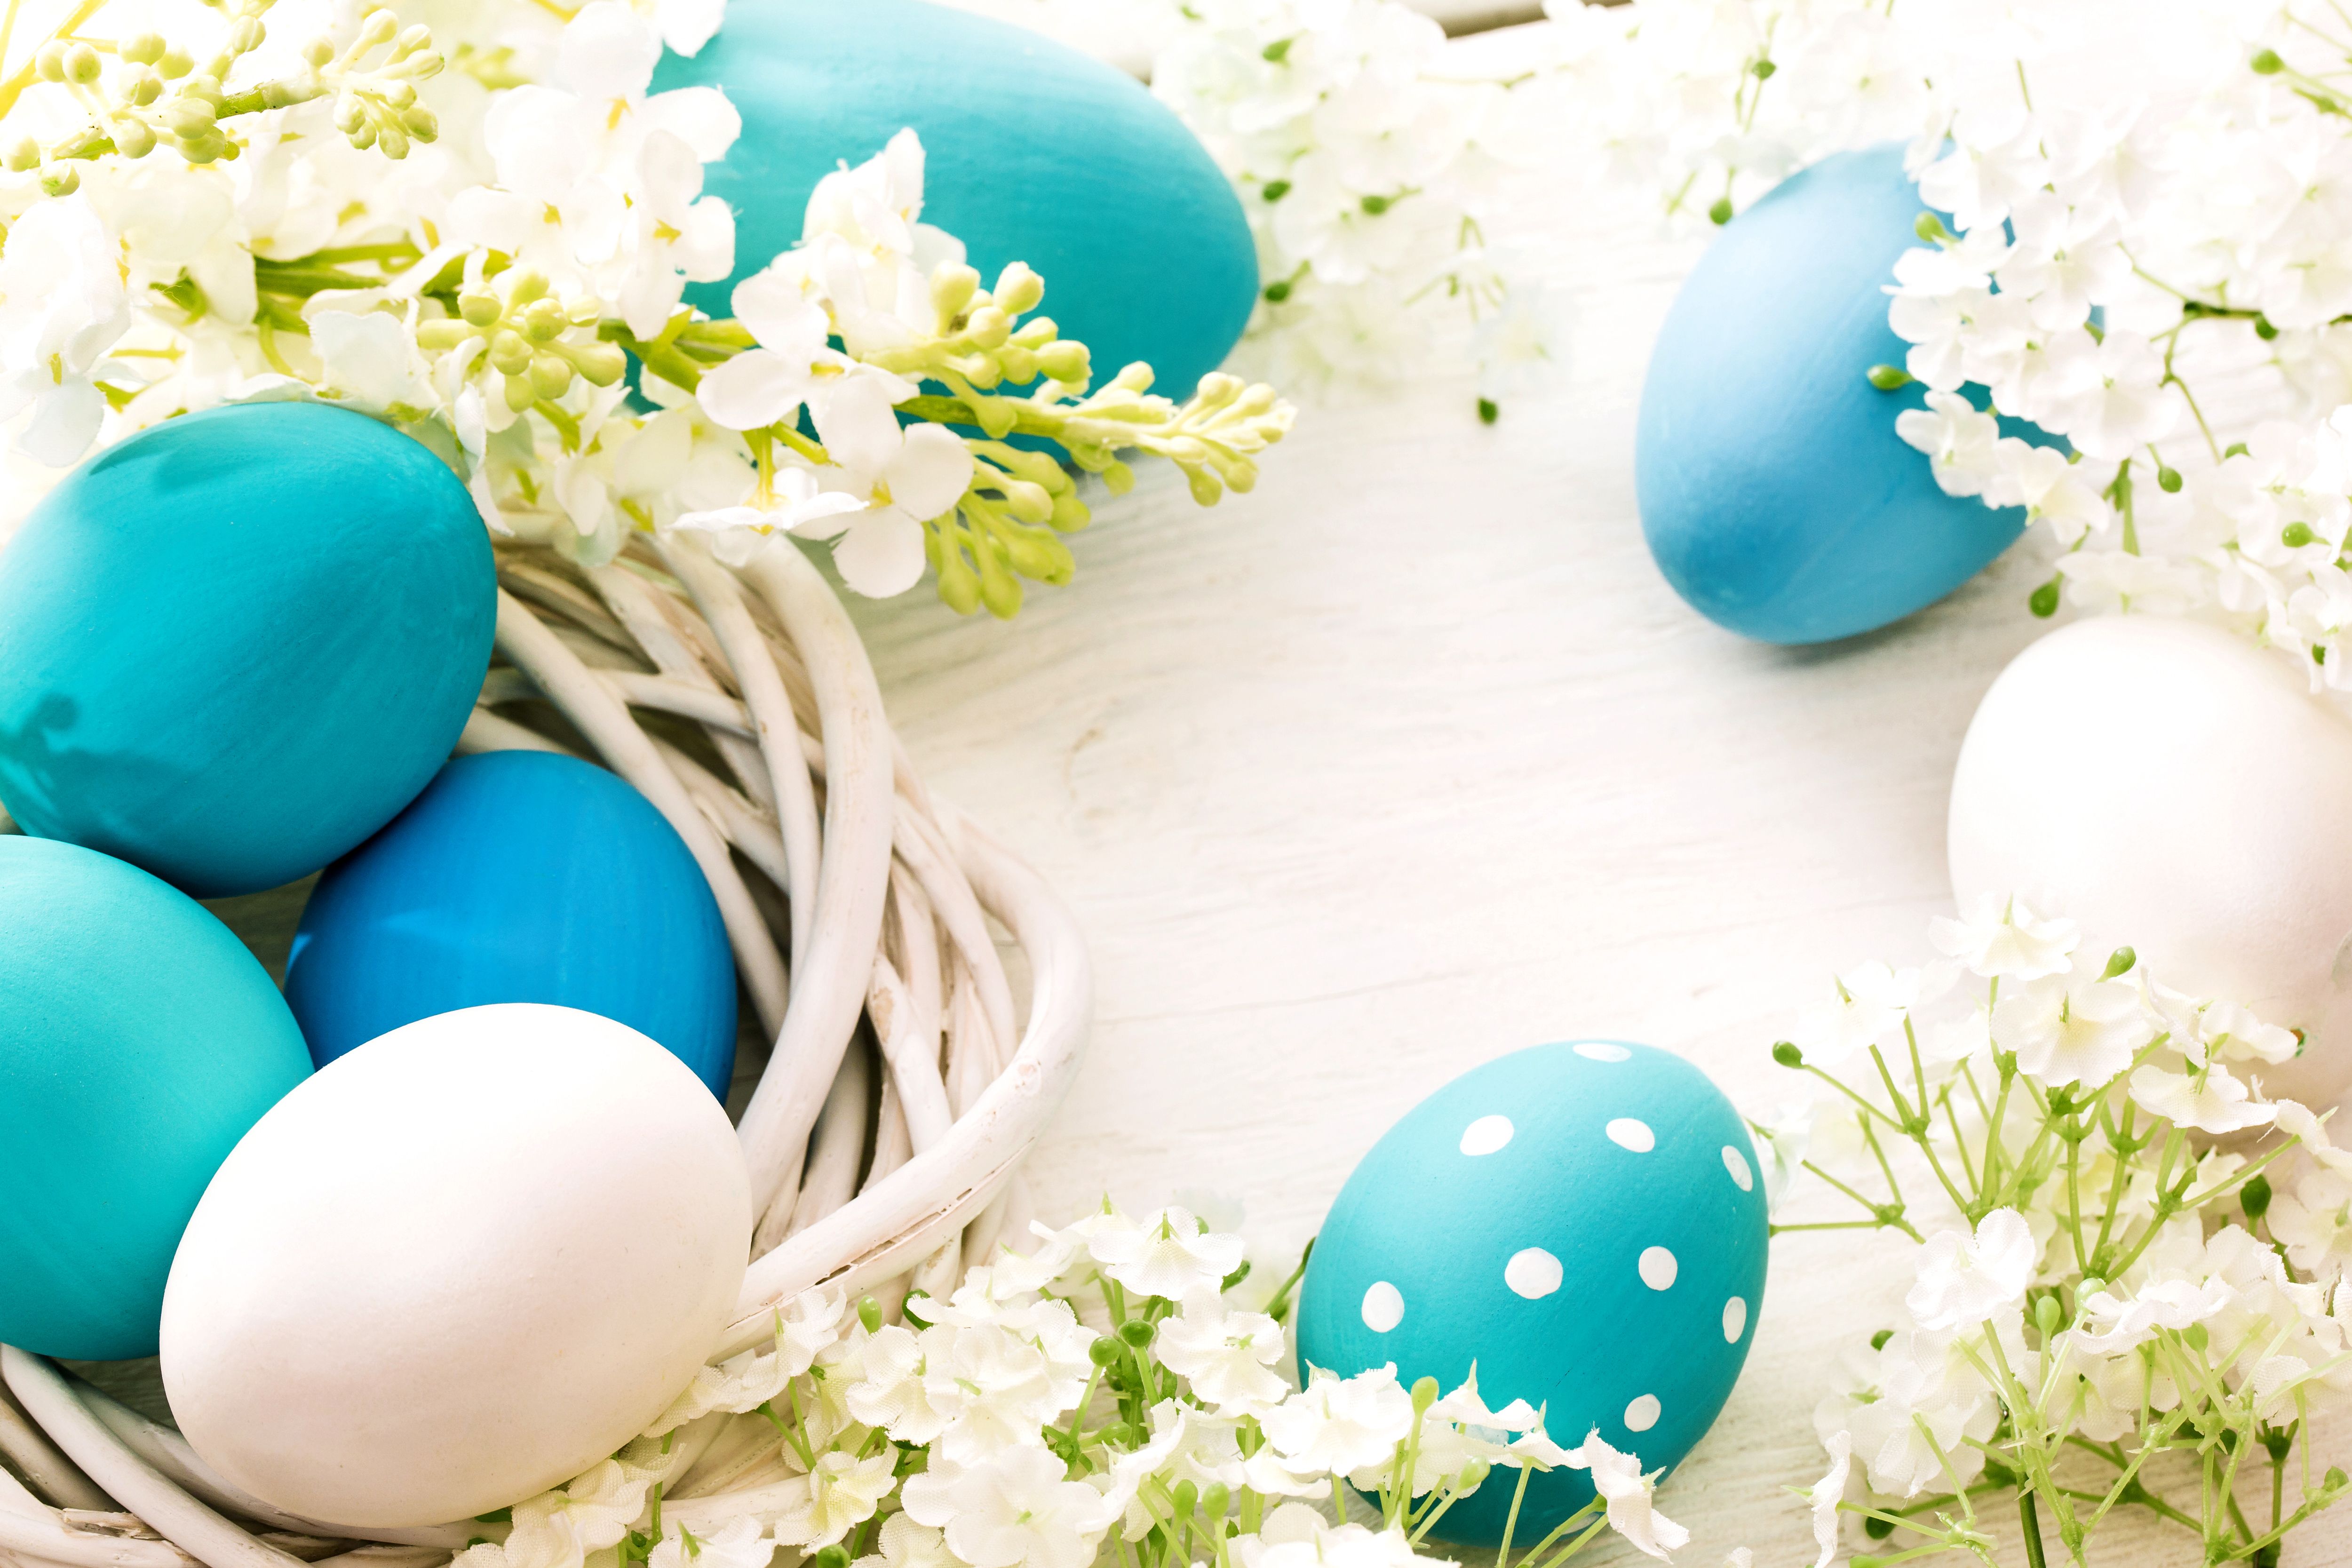 Blue Easter Eggs Background Quality Image And Transparent PNG Free Clipart